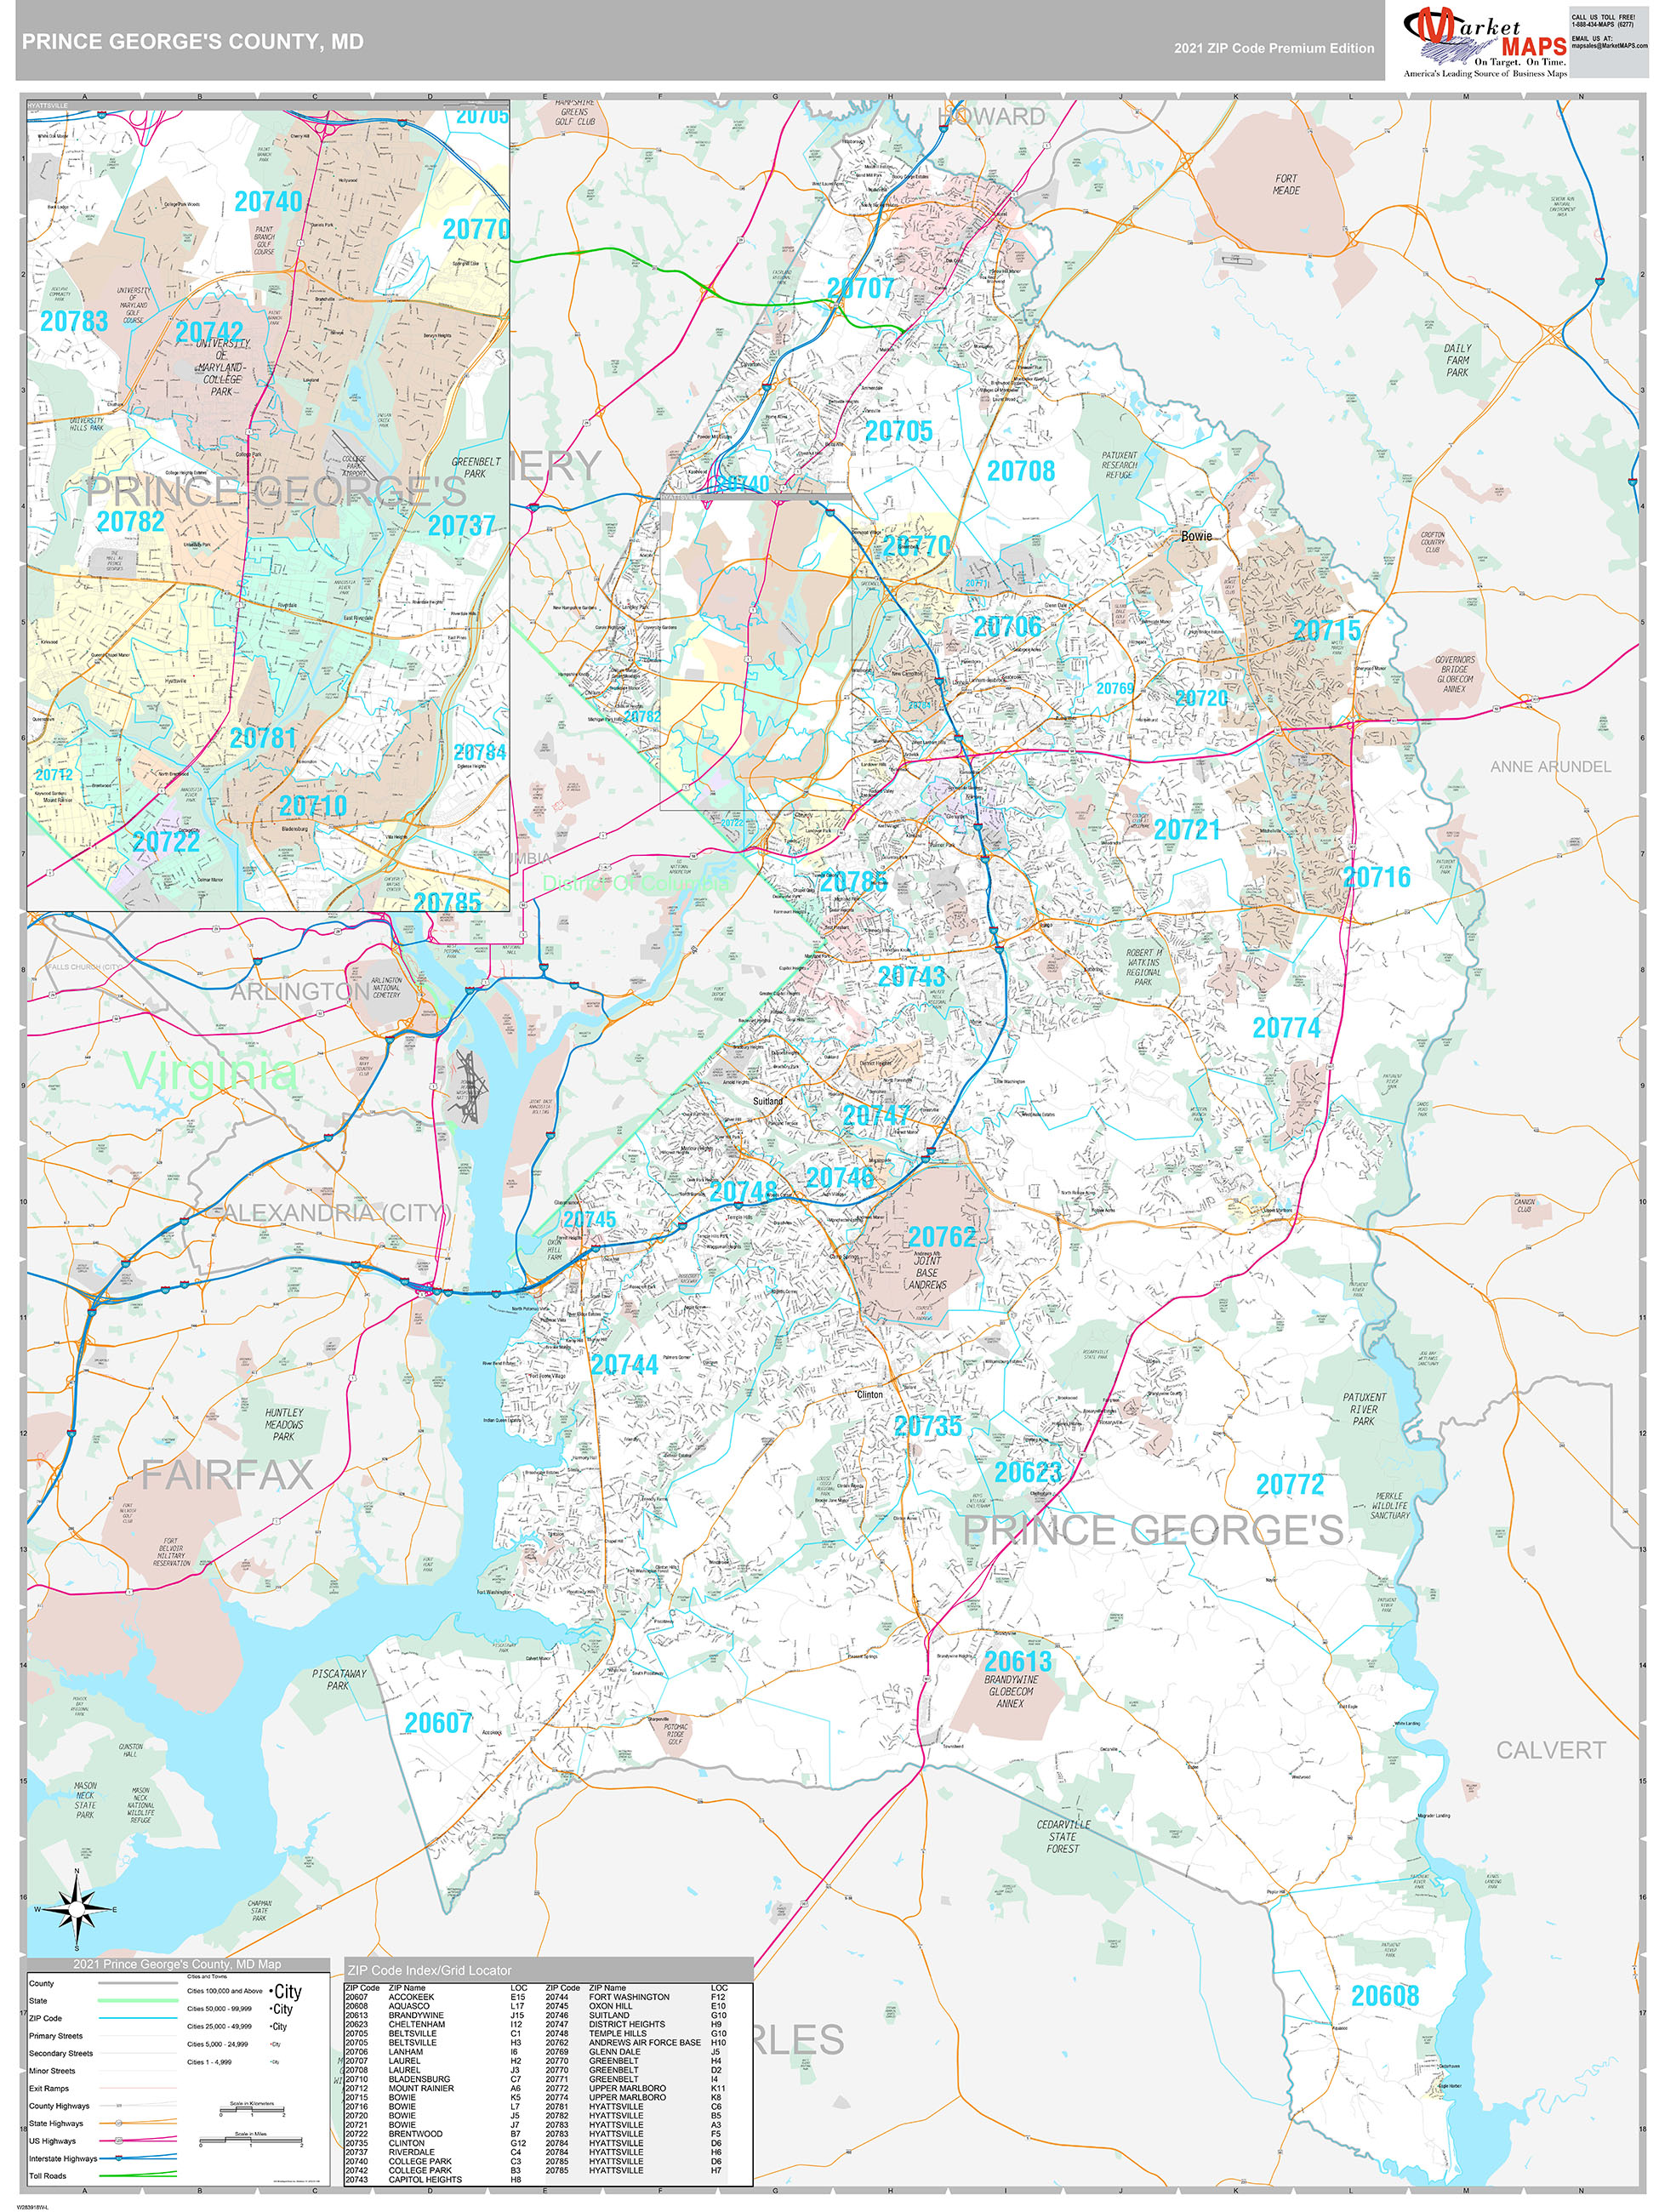 Prince George's County, MD Wall Map Premium Style by MarketMAPS